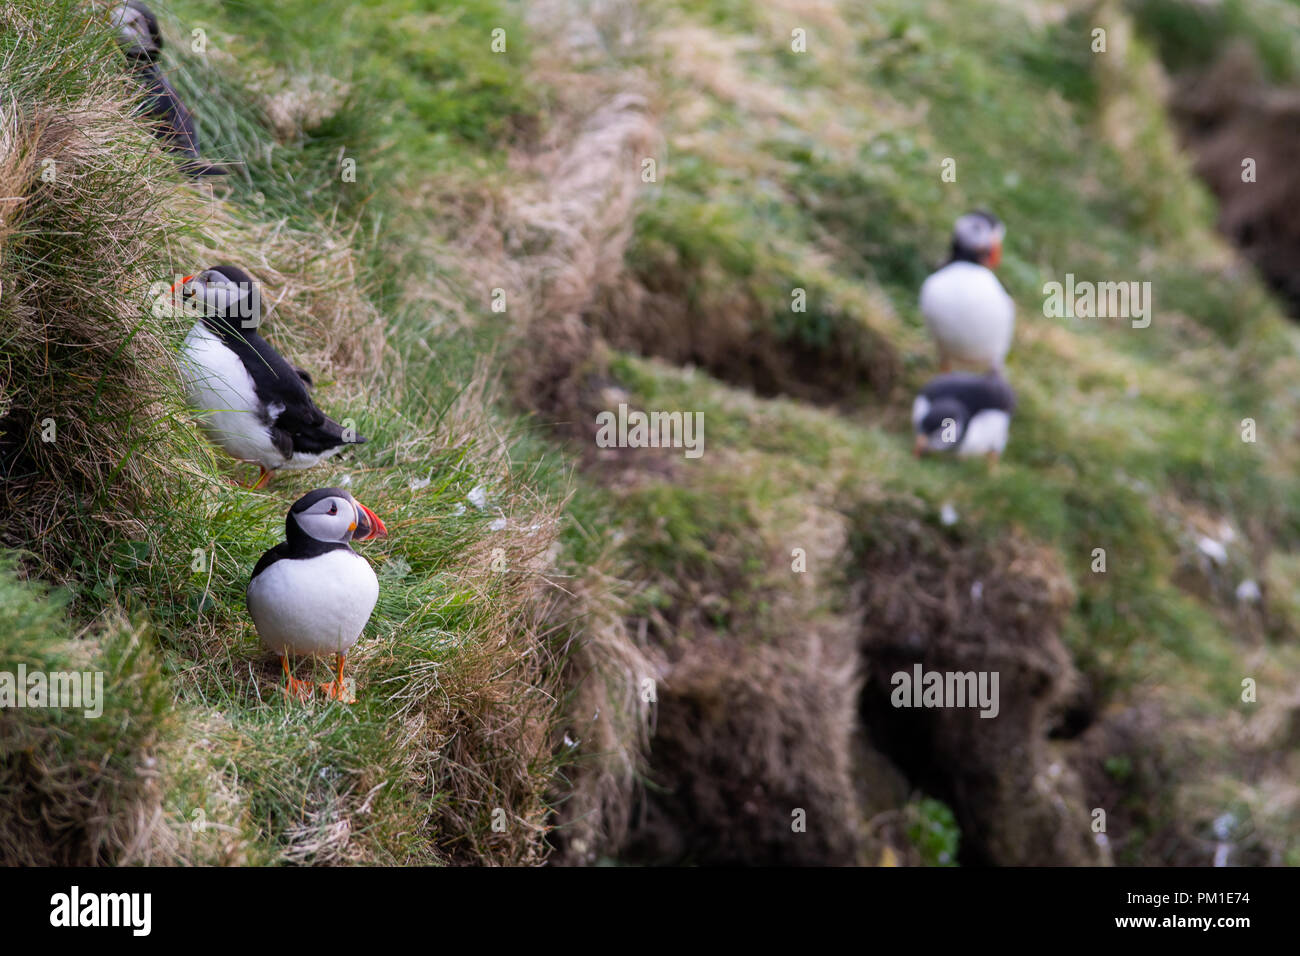 A group of puffins on a ledge Stock Photo